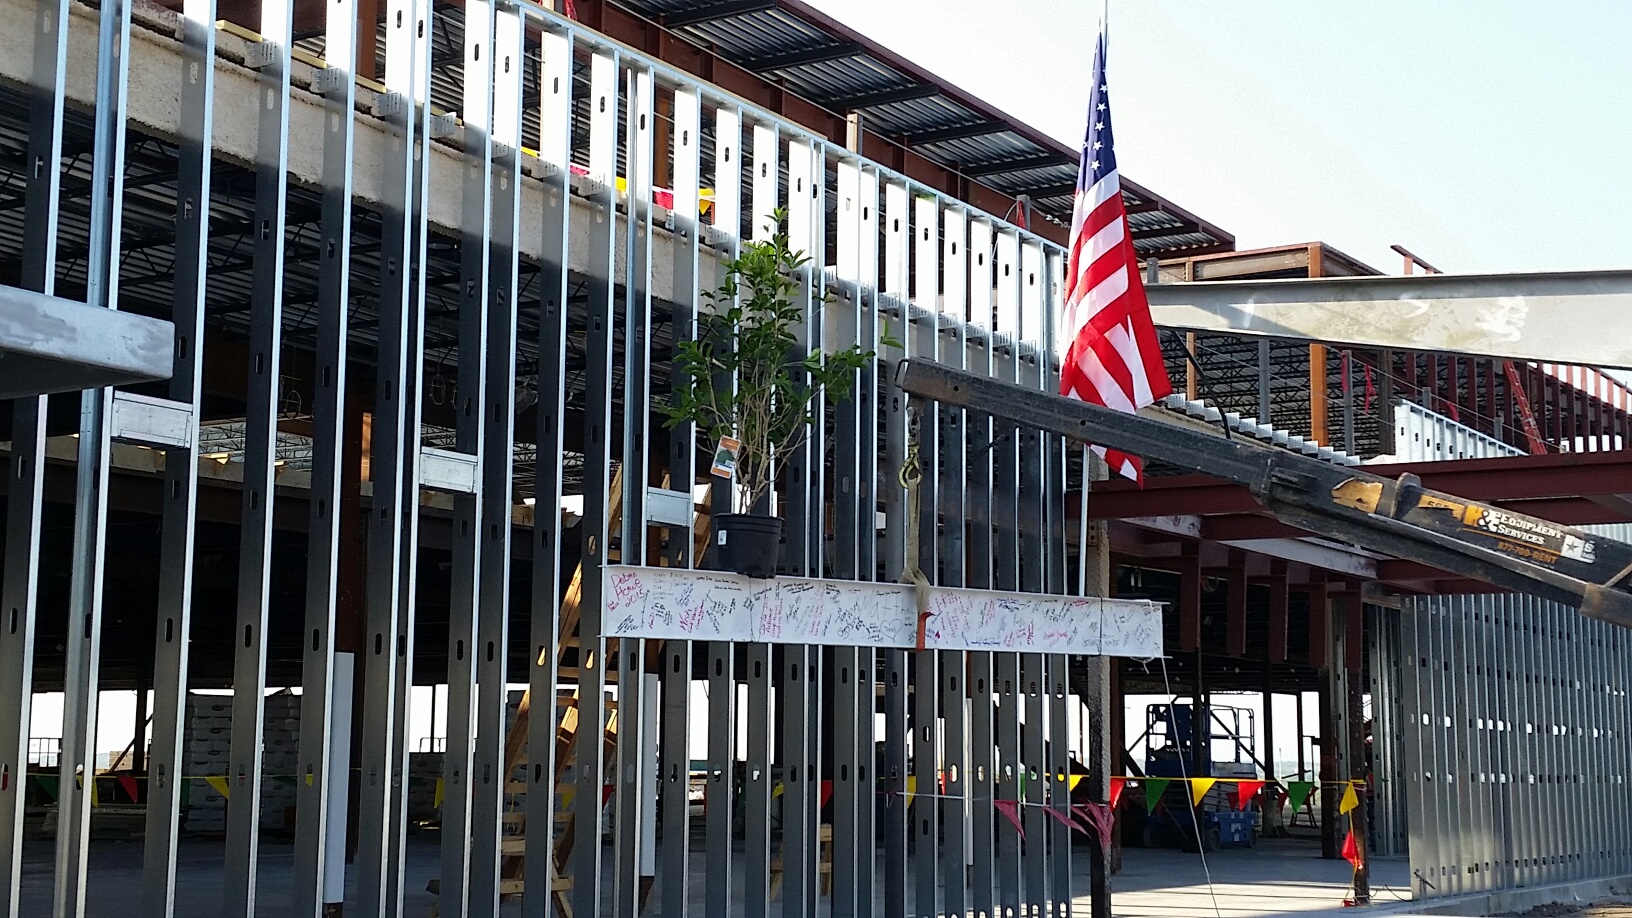 The final beam of Otto Kaiser Memorial Hospital is adorned with an American flag and an evergreen tree as it is lifted into place, signaling the building's structural completion.